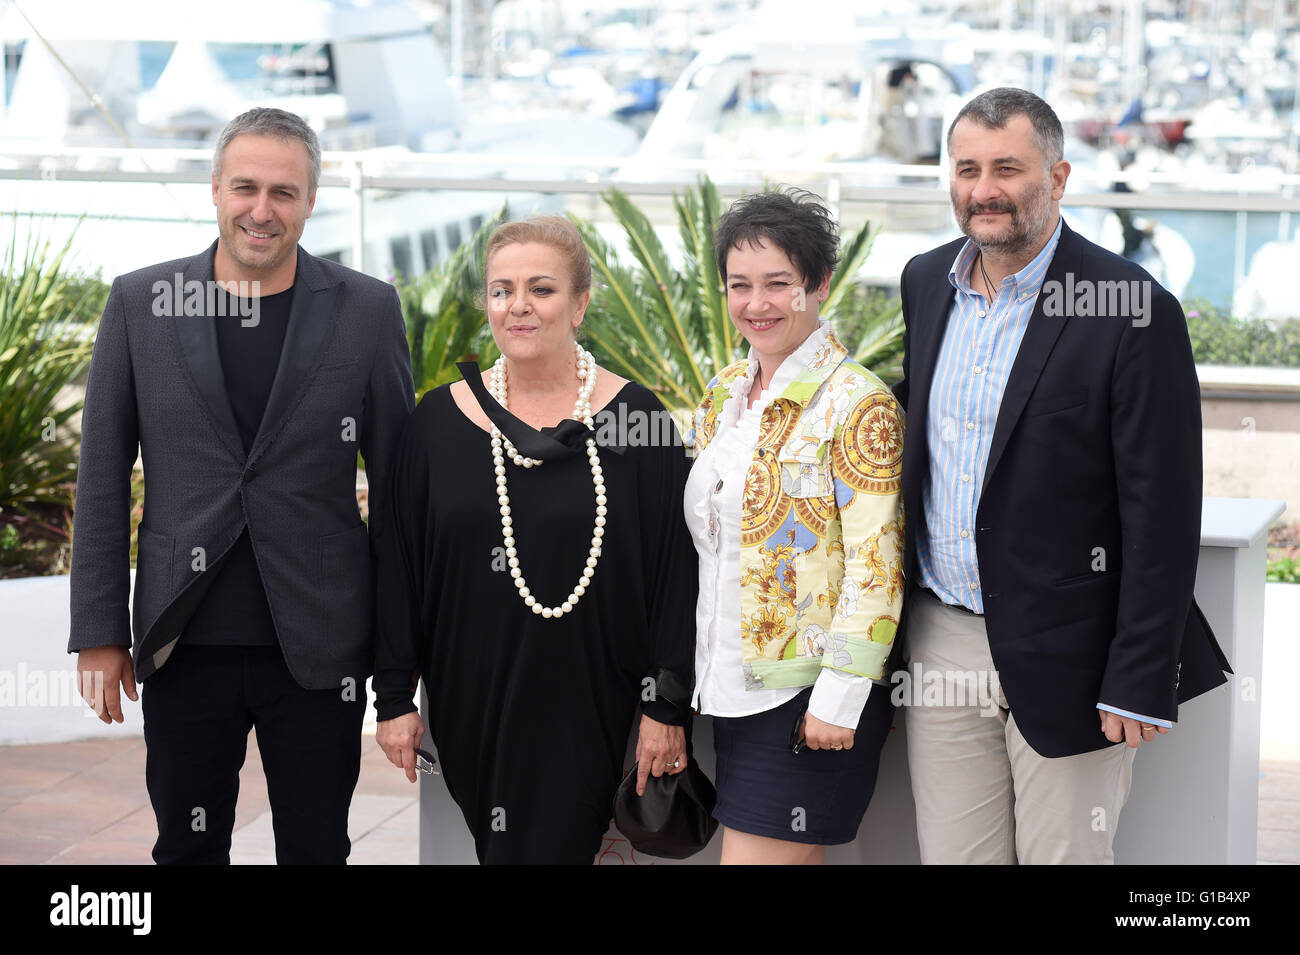 Actor Mimi Branescu, (l-r) actress Dana Dogaru, producer Anca Puiu and director Cristi Puiu attends at the photocall 'Sieranevada (Roumanie)' at the 69th Annual Cannes Film Festival at Palais des Festivals in Cannes, France, on 12. May 2016. Photo: Felix Hoerhager/dpa - NO WIRE SERVICE - Stock Photo